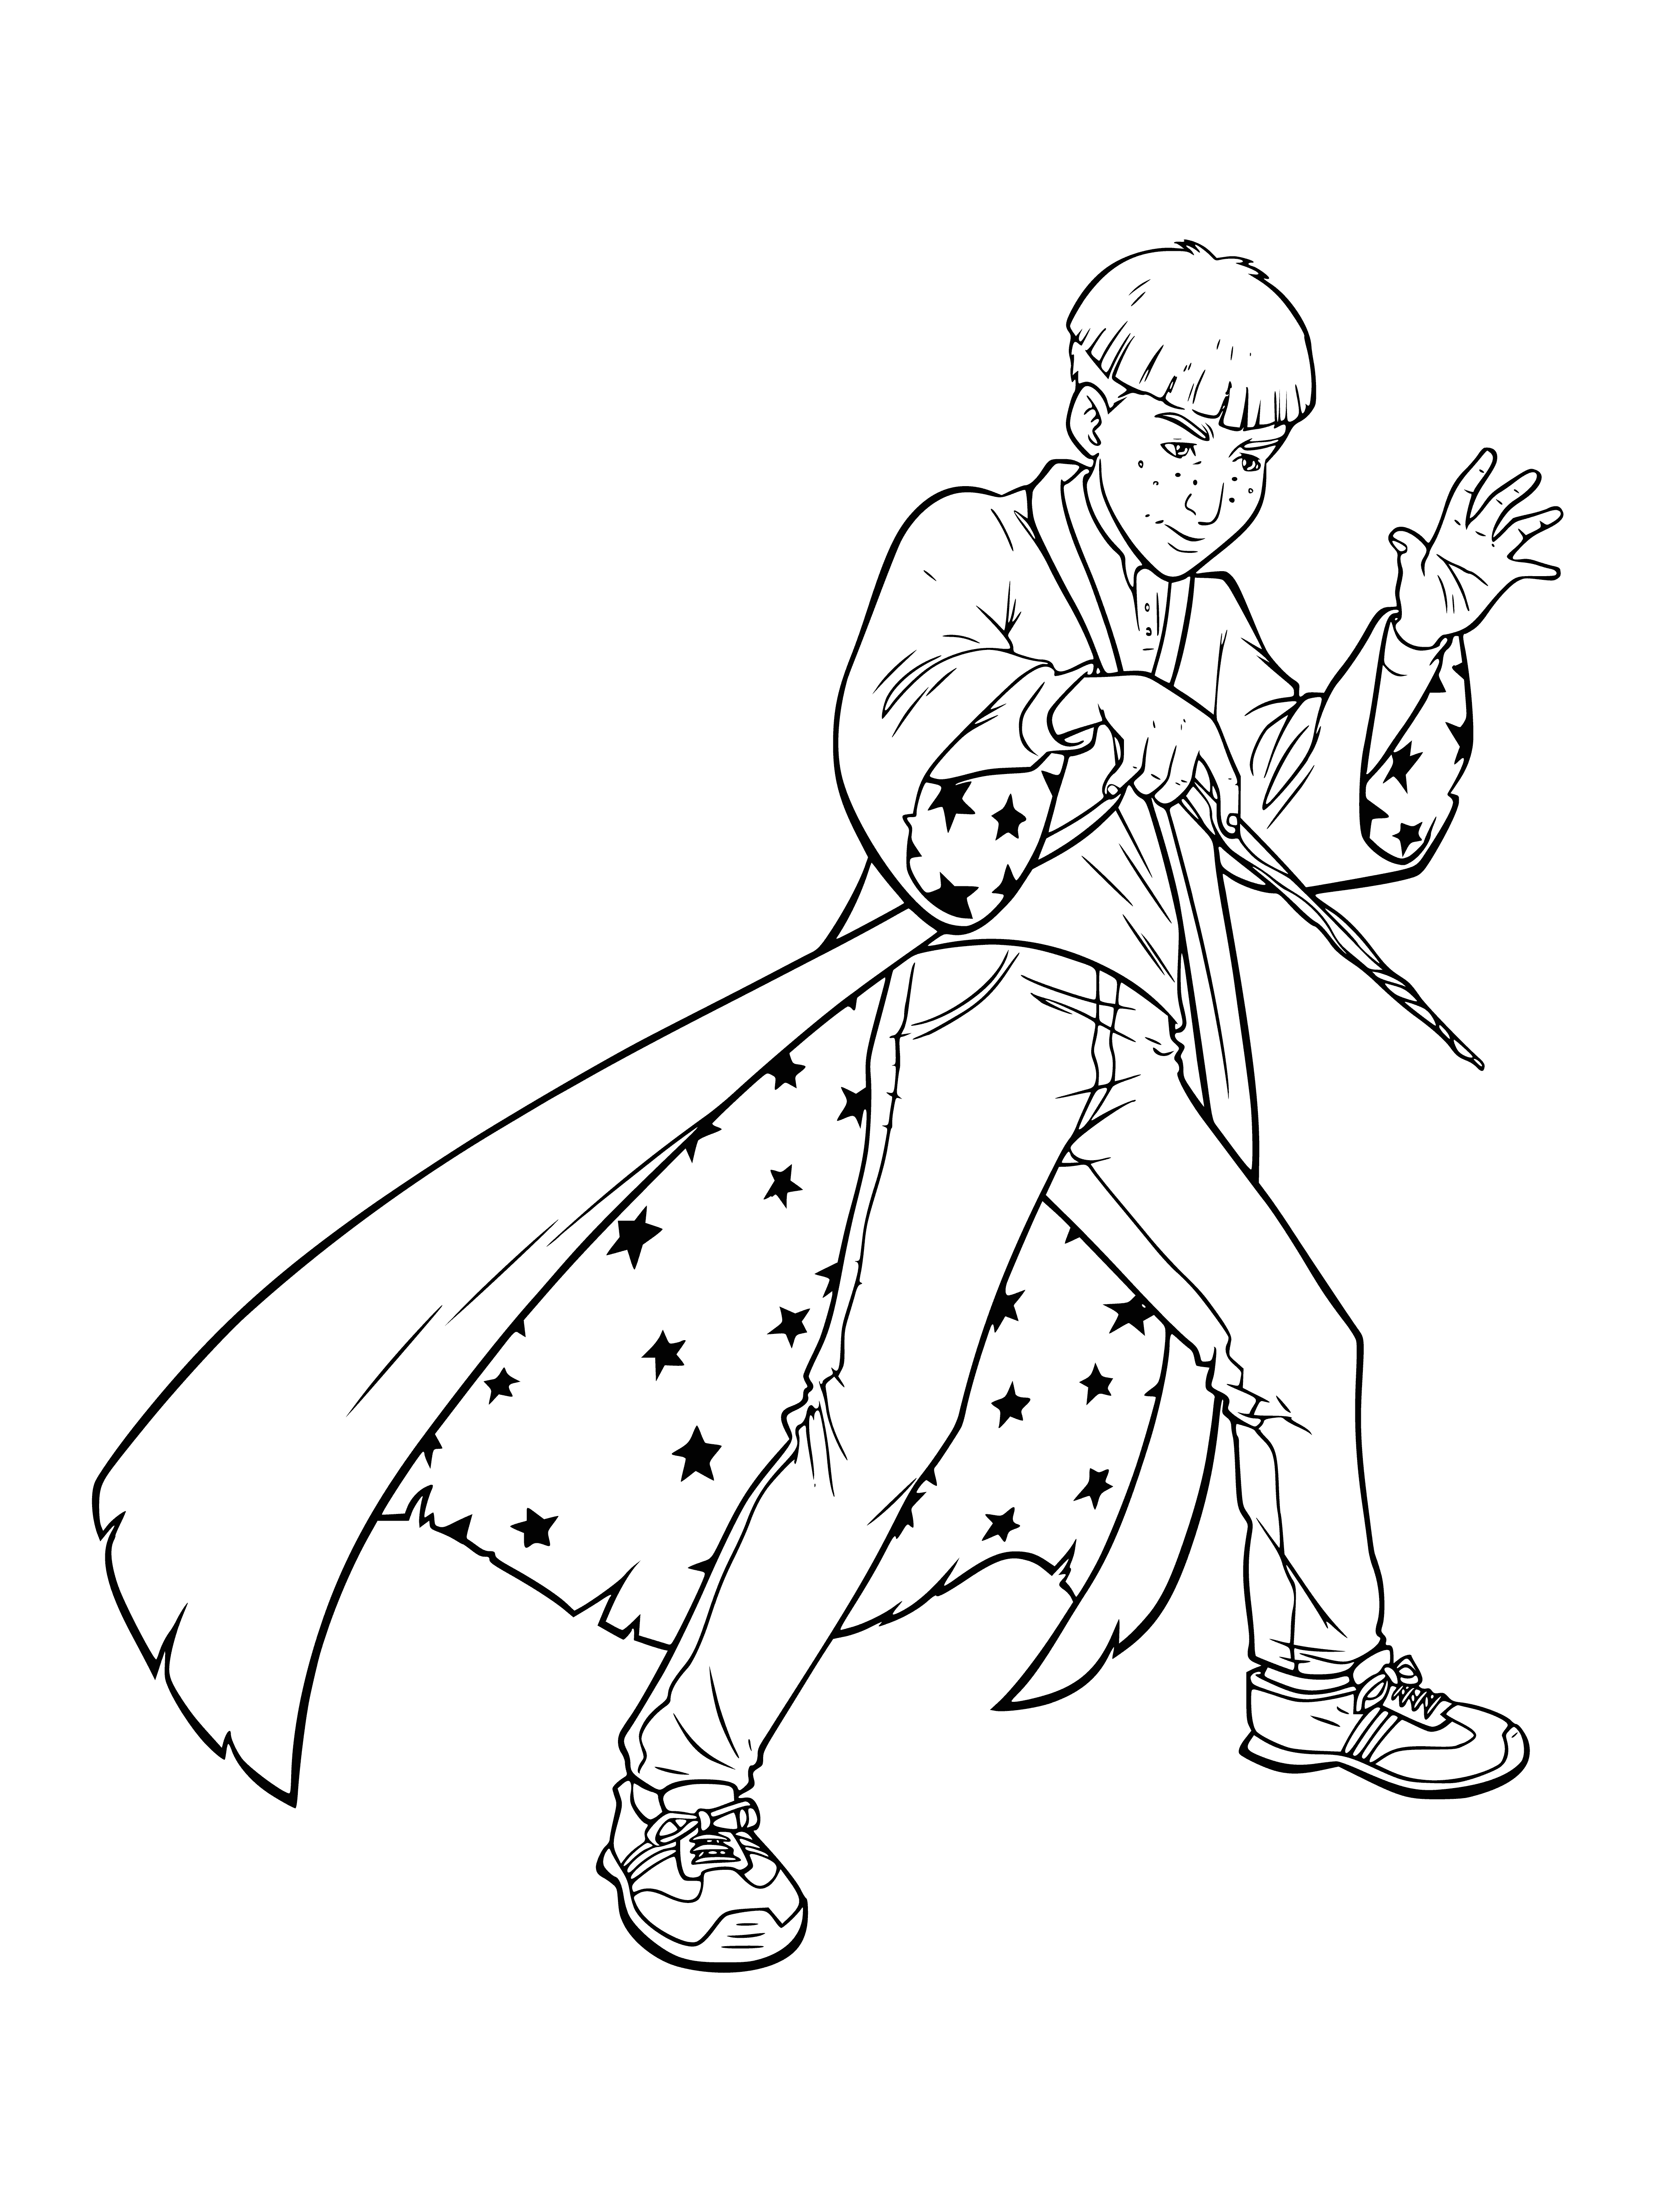 Ron Weasley coloring page